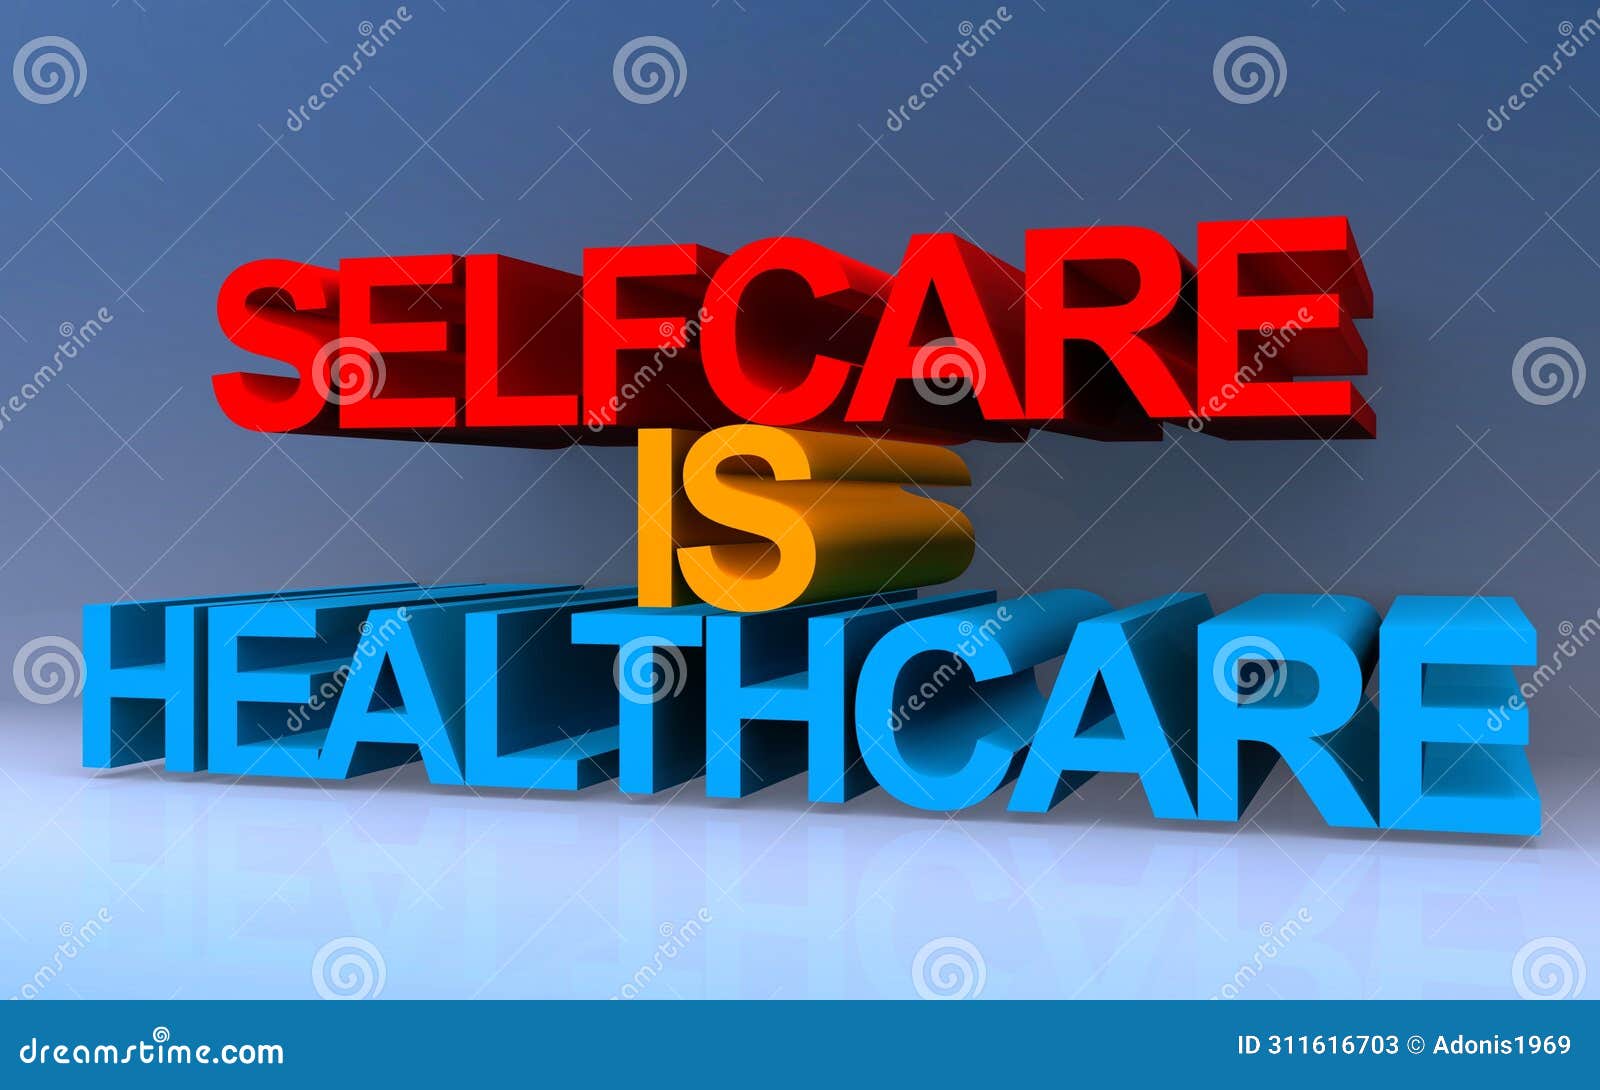 selfcare is healthcare on blue